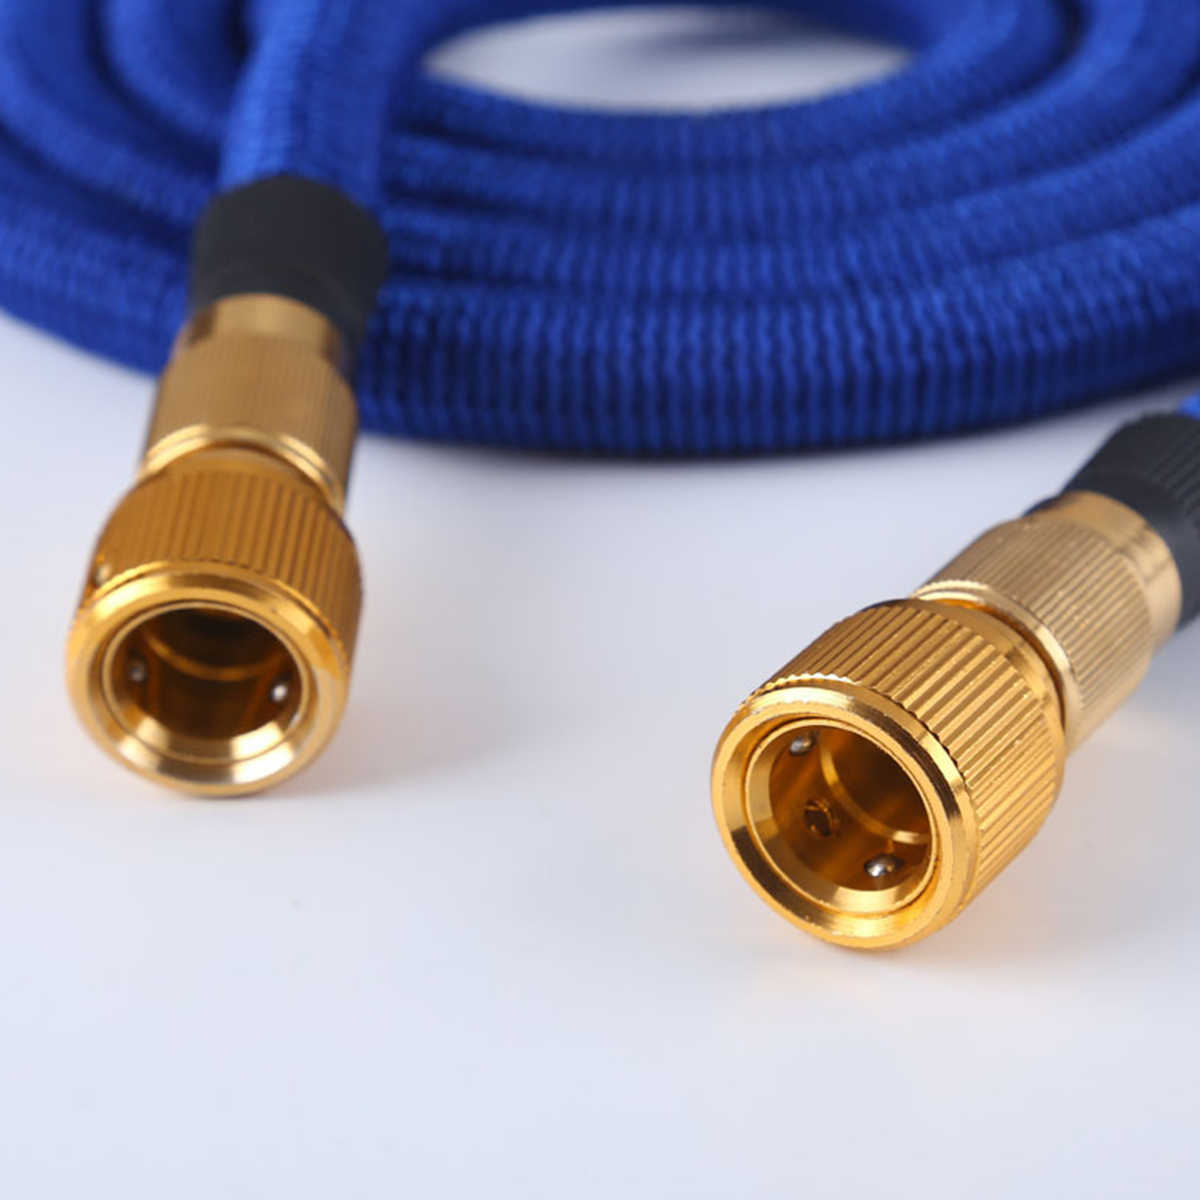 Garden-Hose-Pipe-25M-5M-75M-10M-Expandable-Watering-Washing-Hose-Copper-Plated-1709392-10